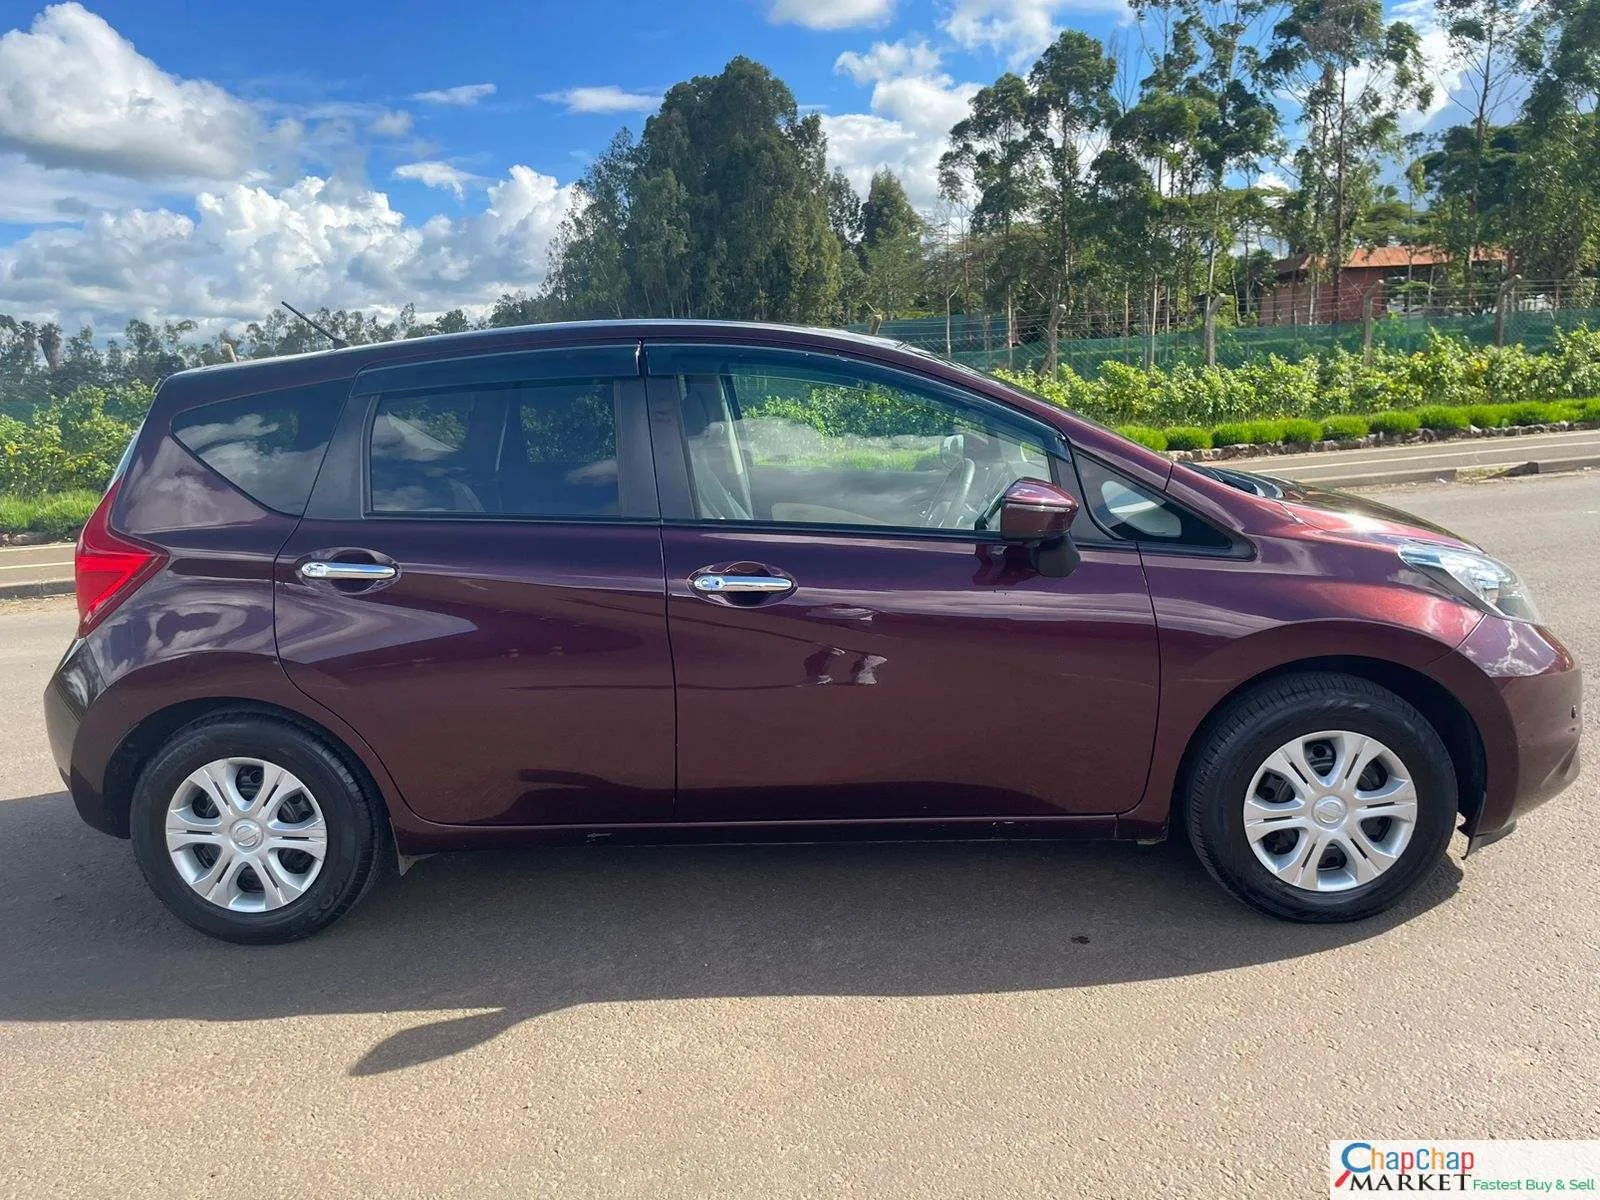 Nissan Note Kenya New QUICK SALE You Pay 20% Deposit Trade in Ok Nissan Note for sale in kenya hire purchase installments EXCLUSIVE 2017